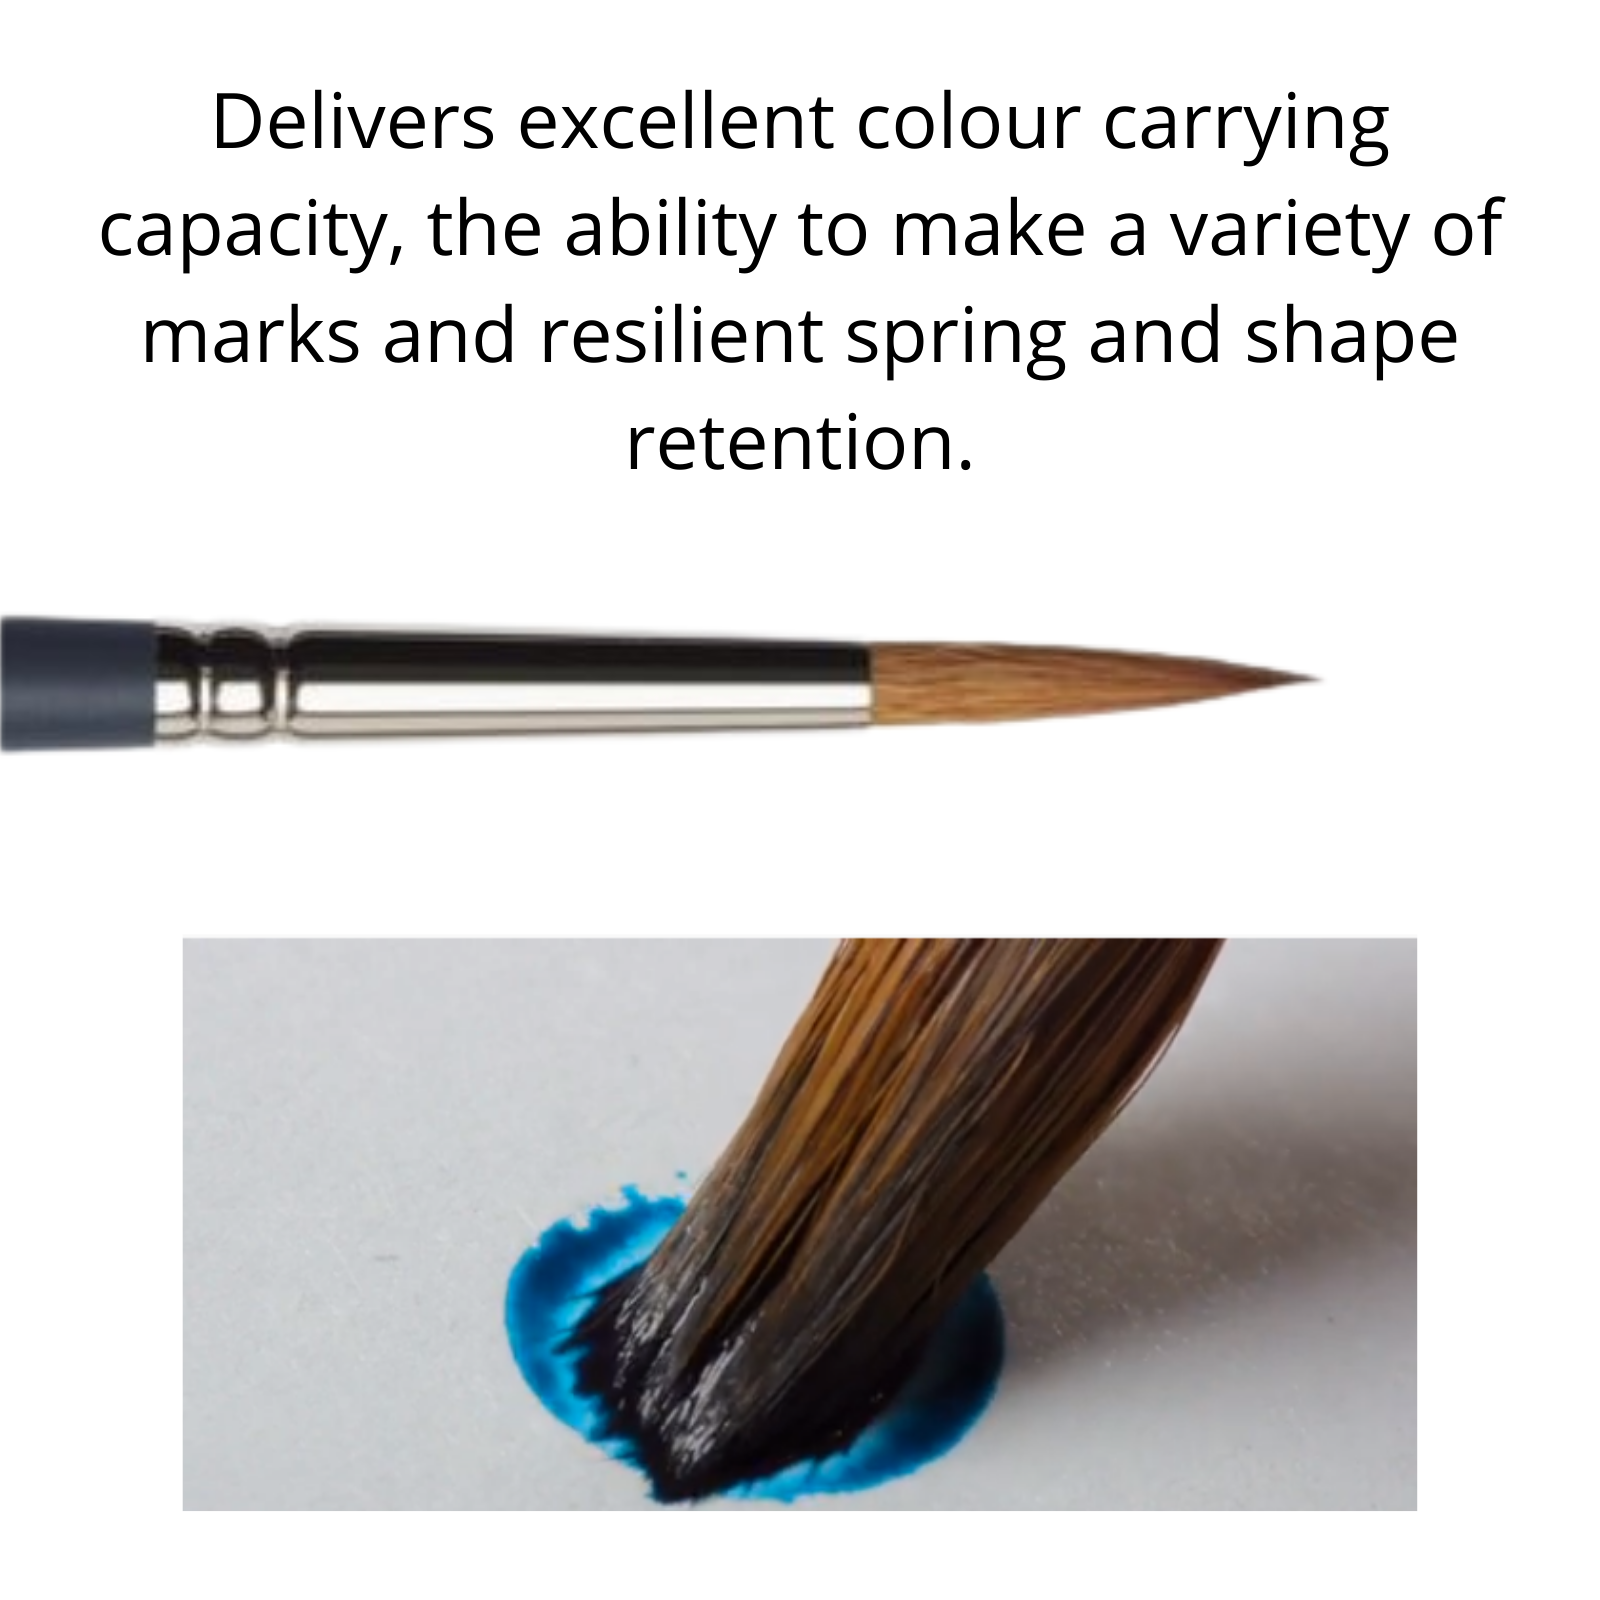 Winsor and Newton Professional Watercolour Paintbrushes, Synthetic Sable Brushes - delivers excellent colour carrying capacity